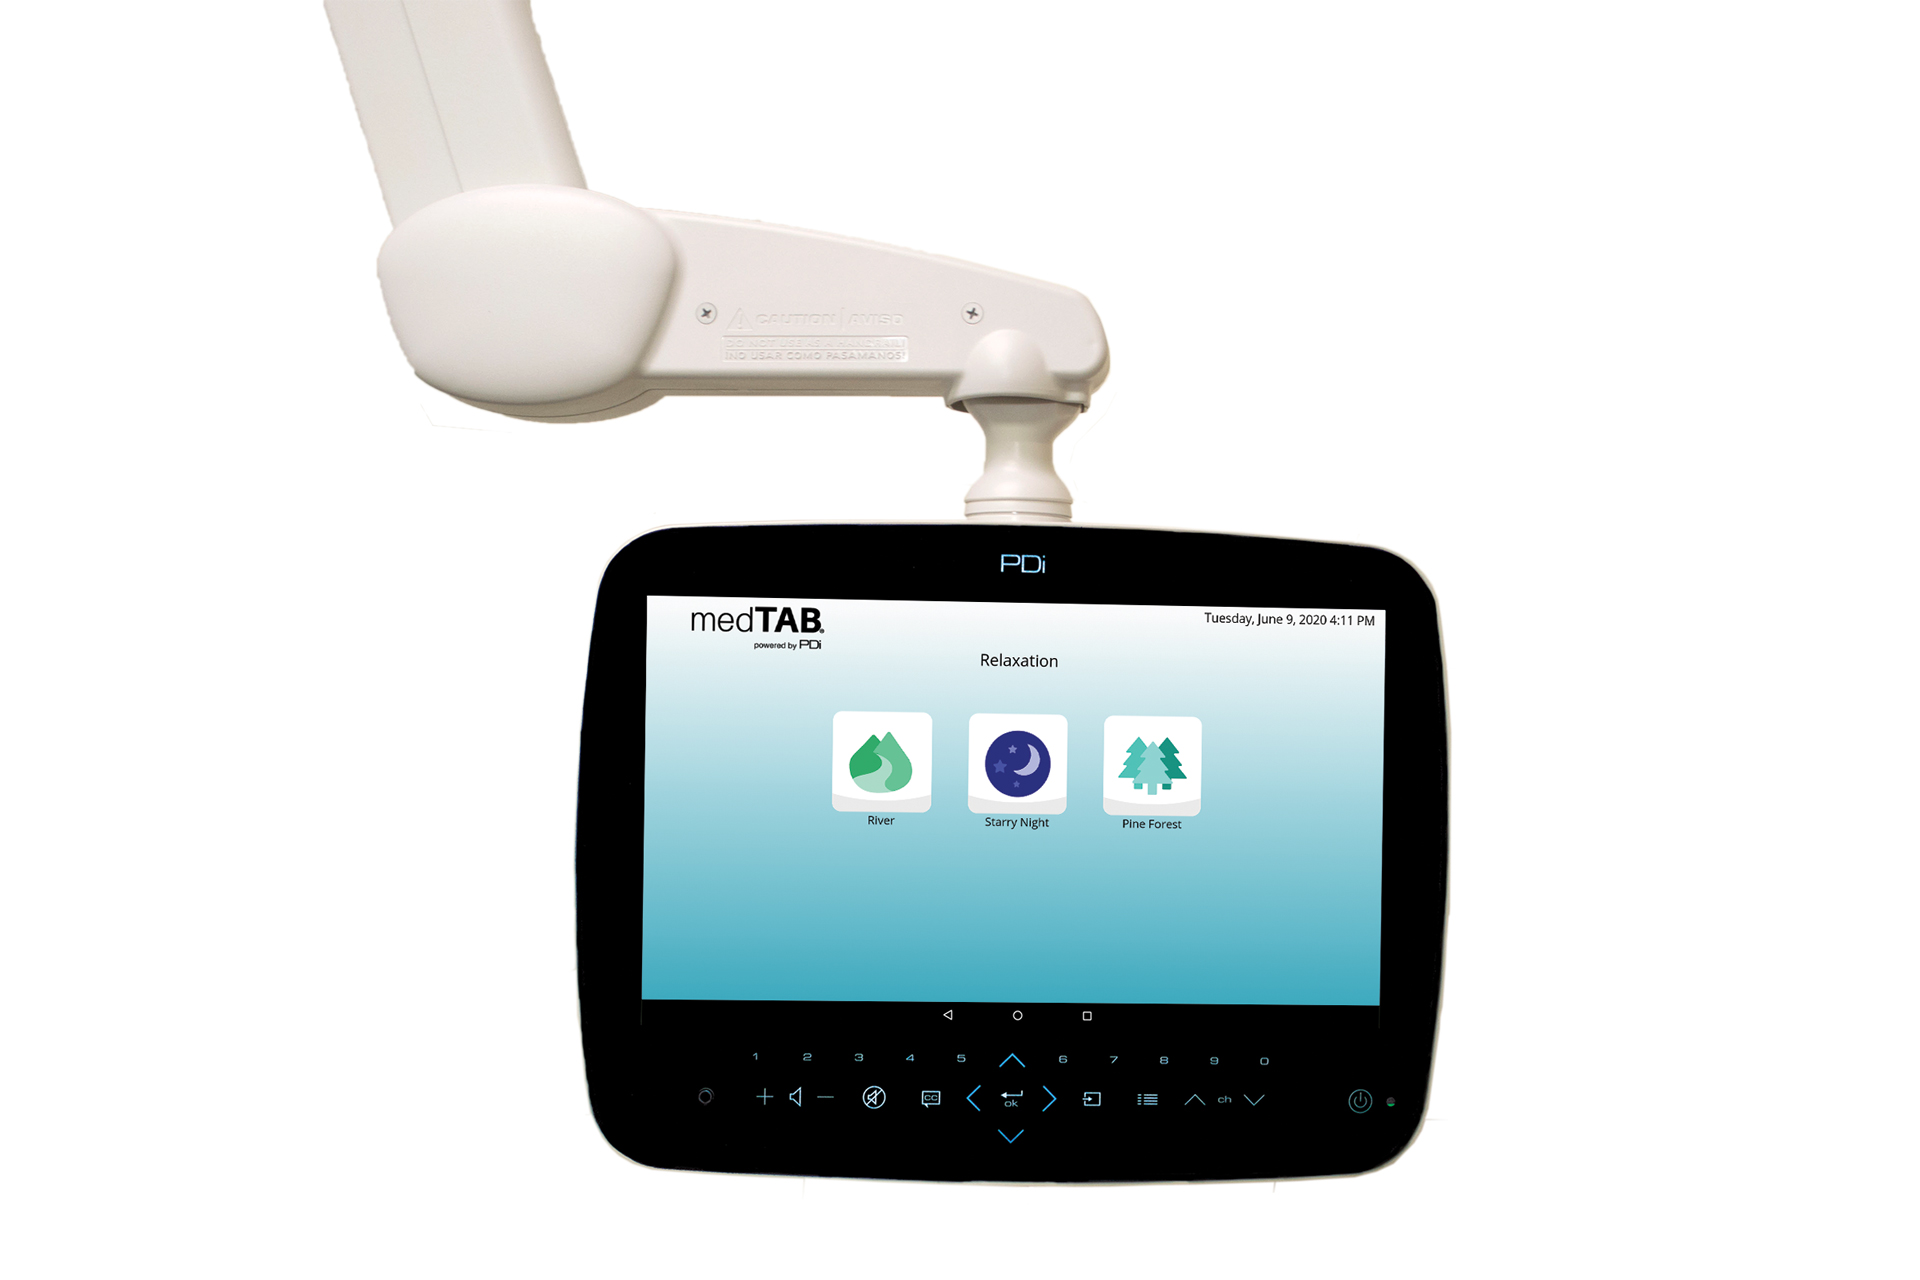 Product image of the medTAB14 healthcare television built by PDi Communication Systems, Inc. on the relaxation content screen